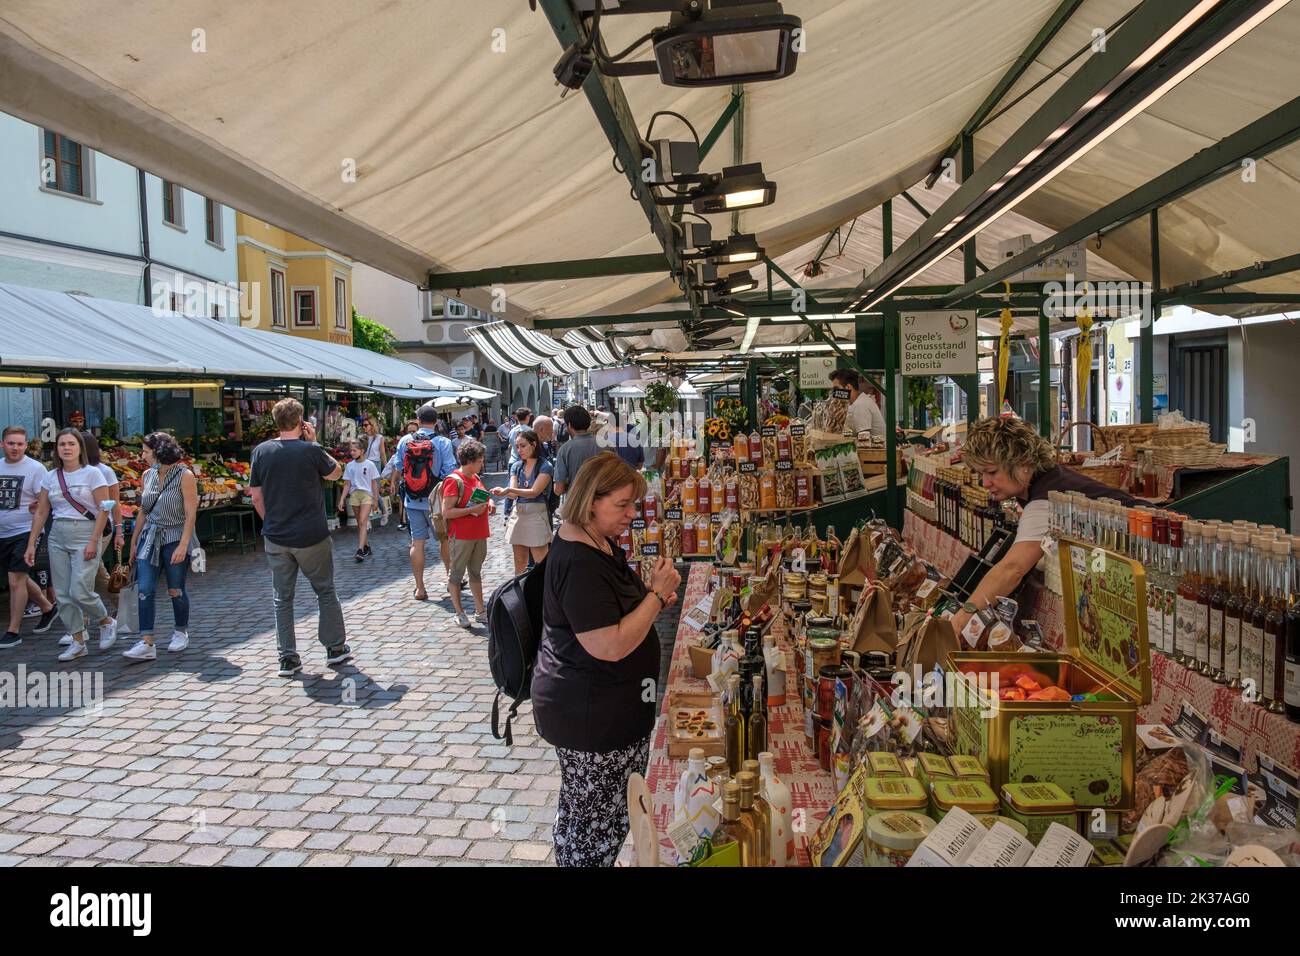 Tourists and locals shopping at the market arround the Torgglhaus in the city Bozen Italy. Stock Photo